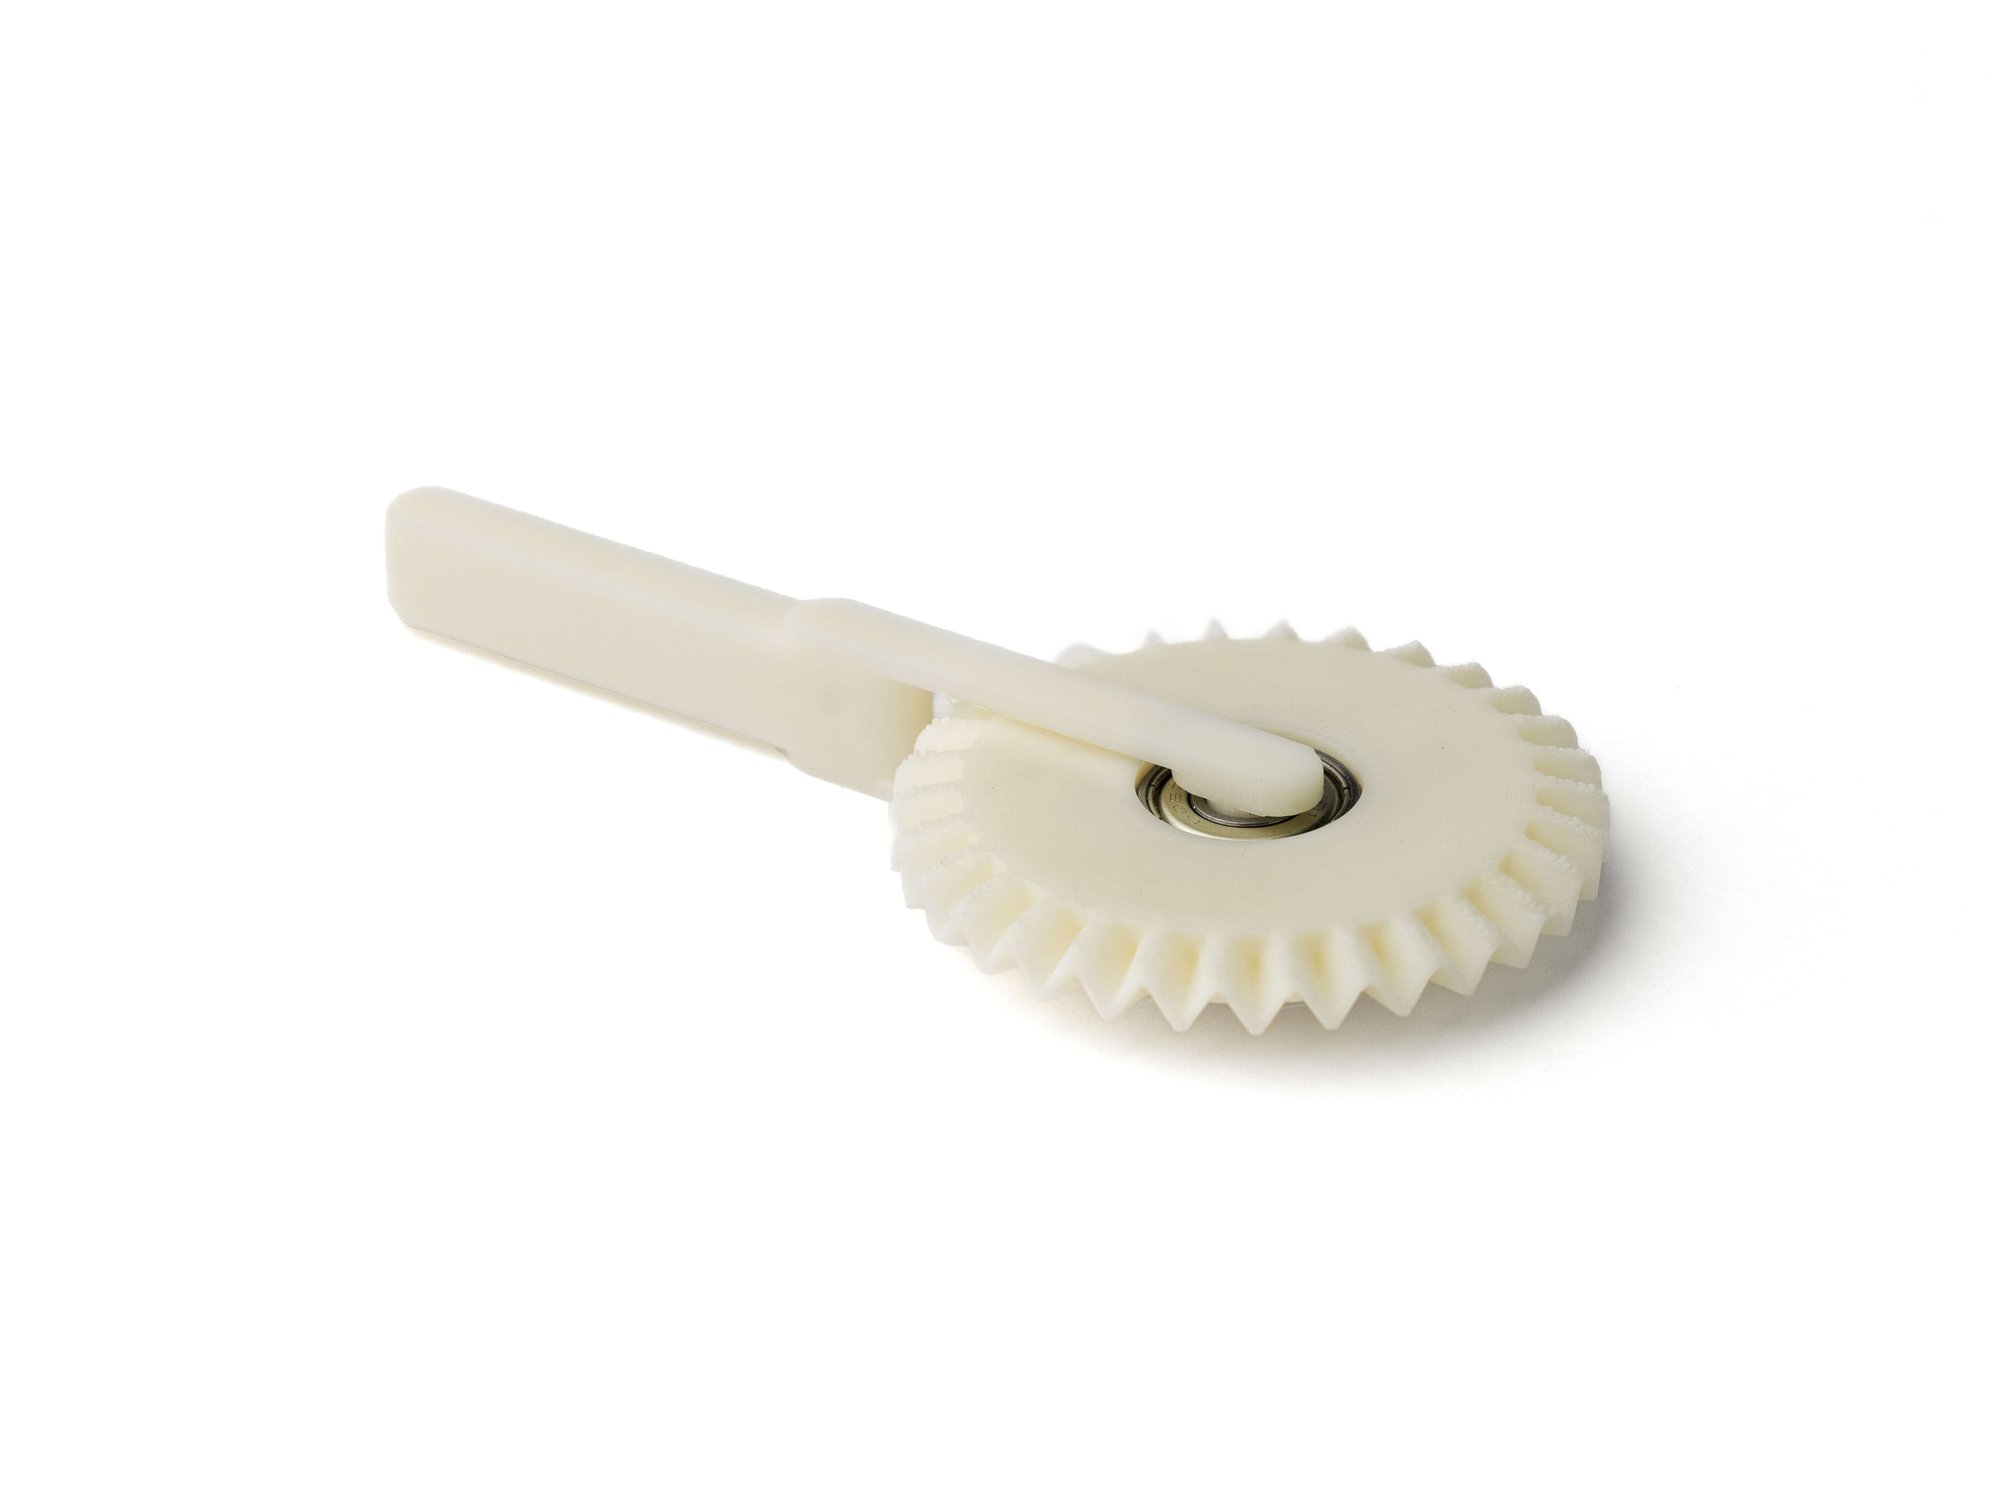 Abs food pizza cutter wheel